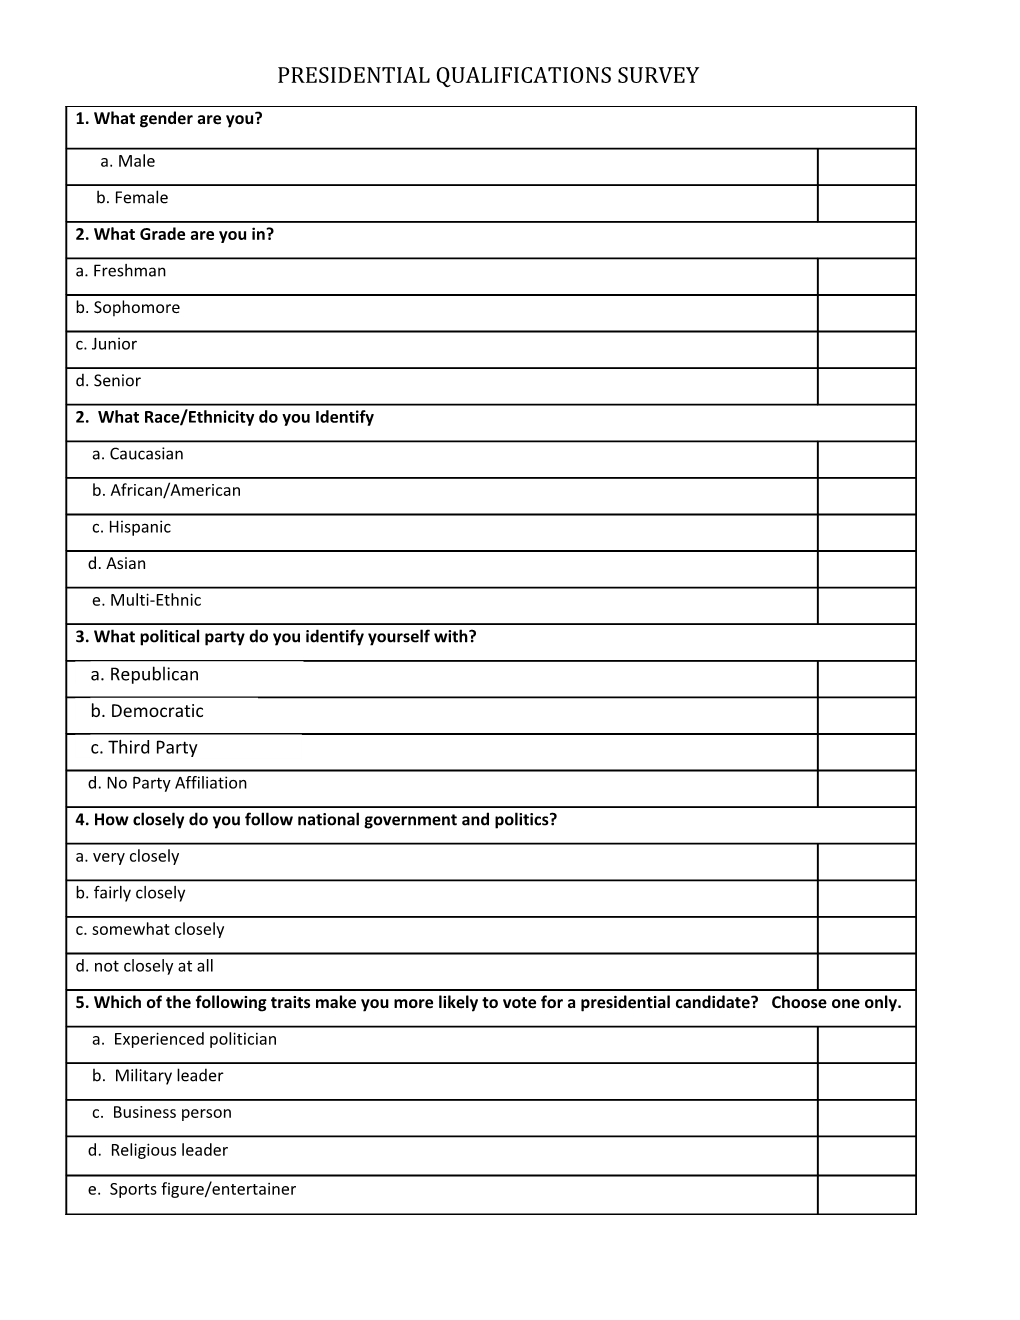 Presidential Qualifications Survey